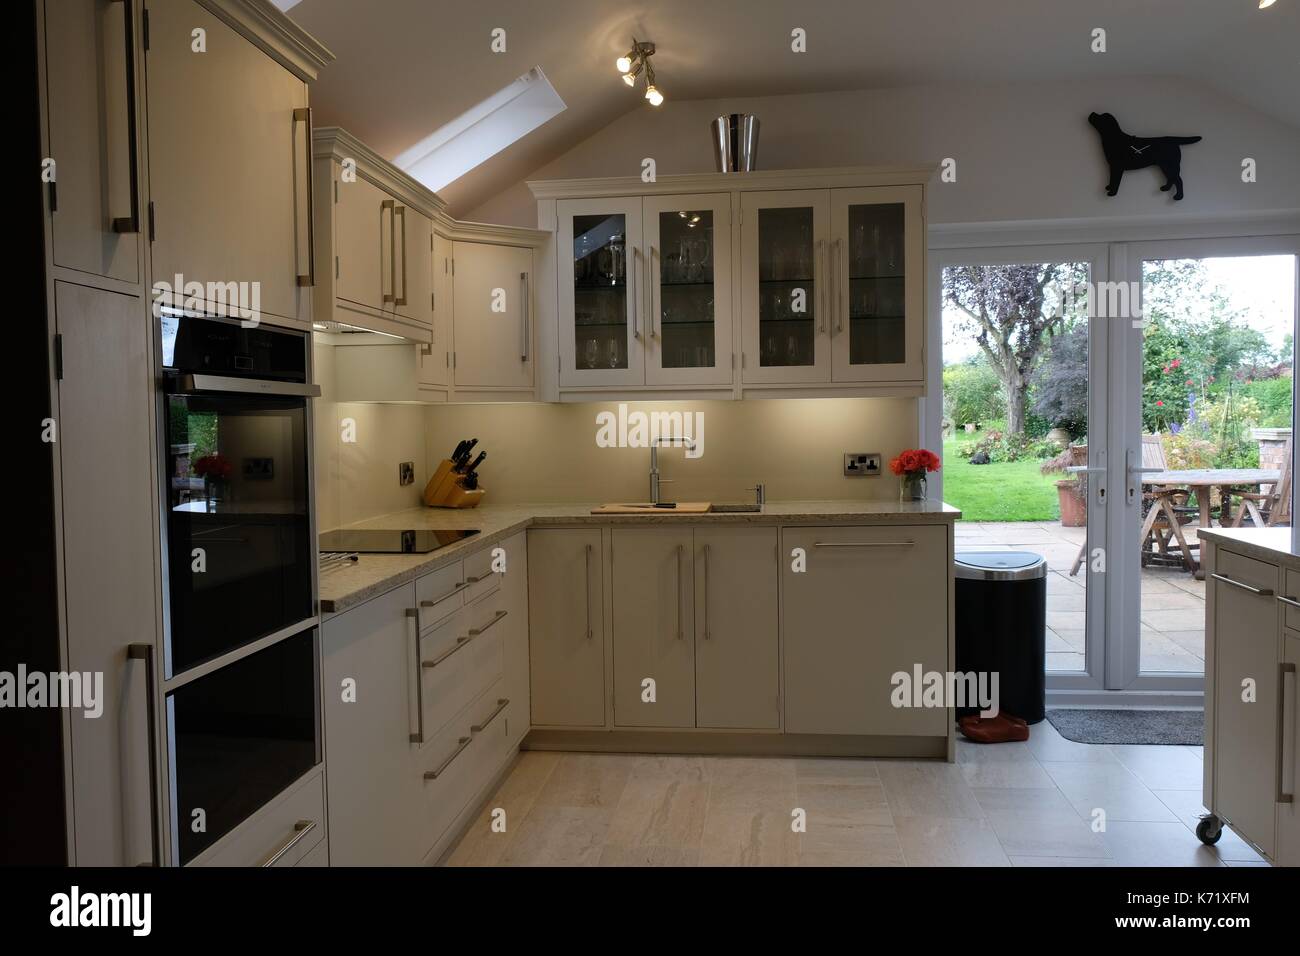 Contemporary kitchen,  Period House, Clean and Uncluttered, Modern, Grey Finnish, Bespoke, Design, Victorian House, Cheshire, England, Granite. Stock Photo